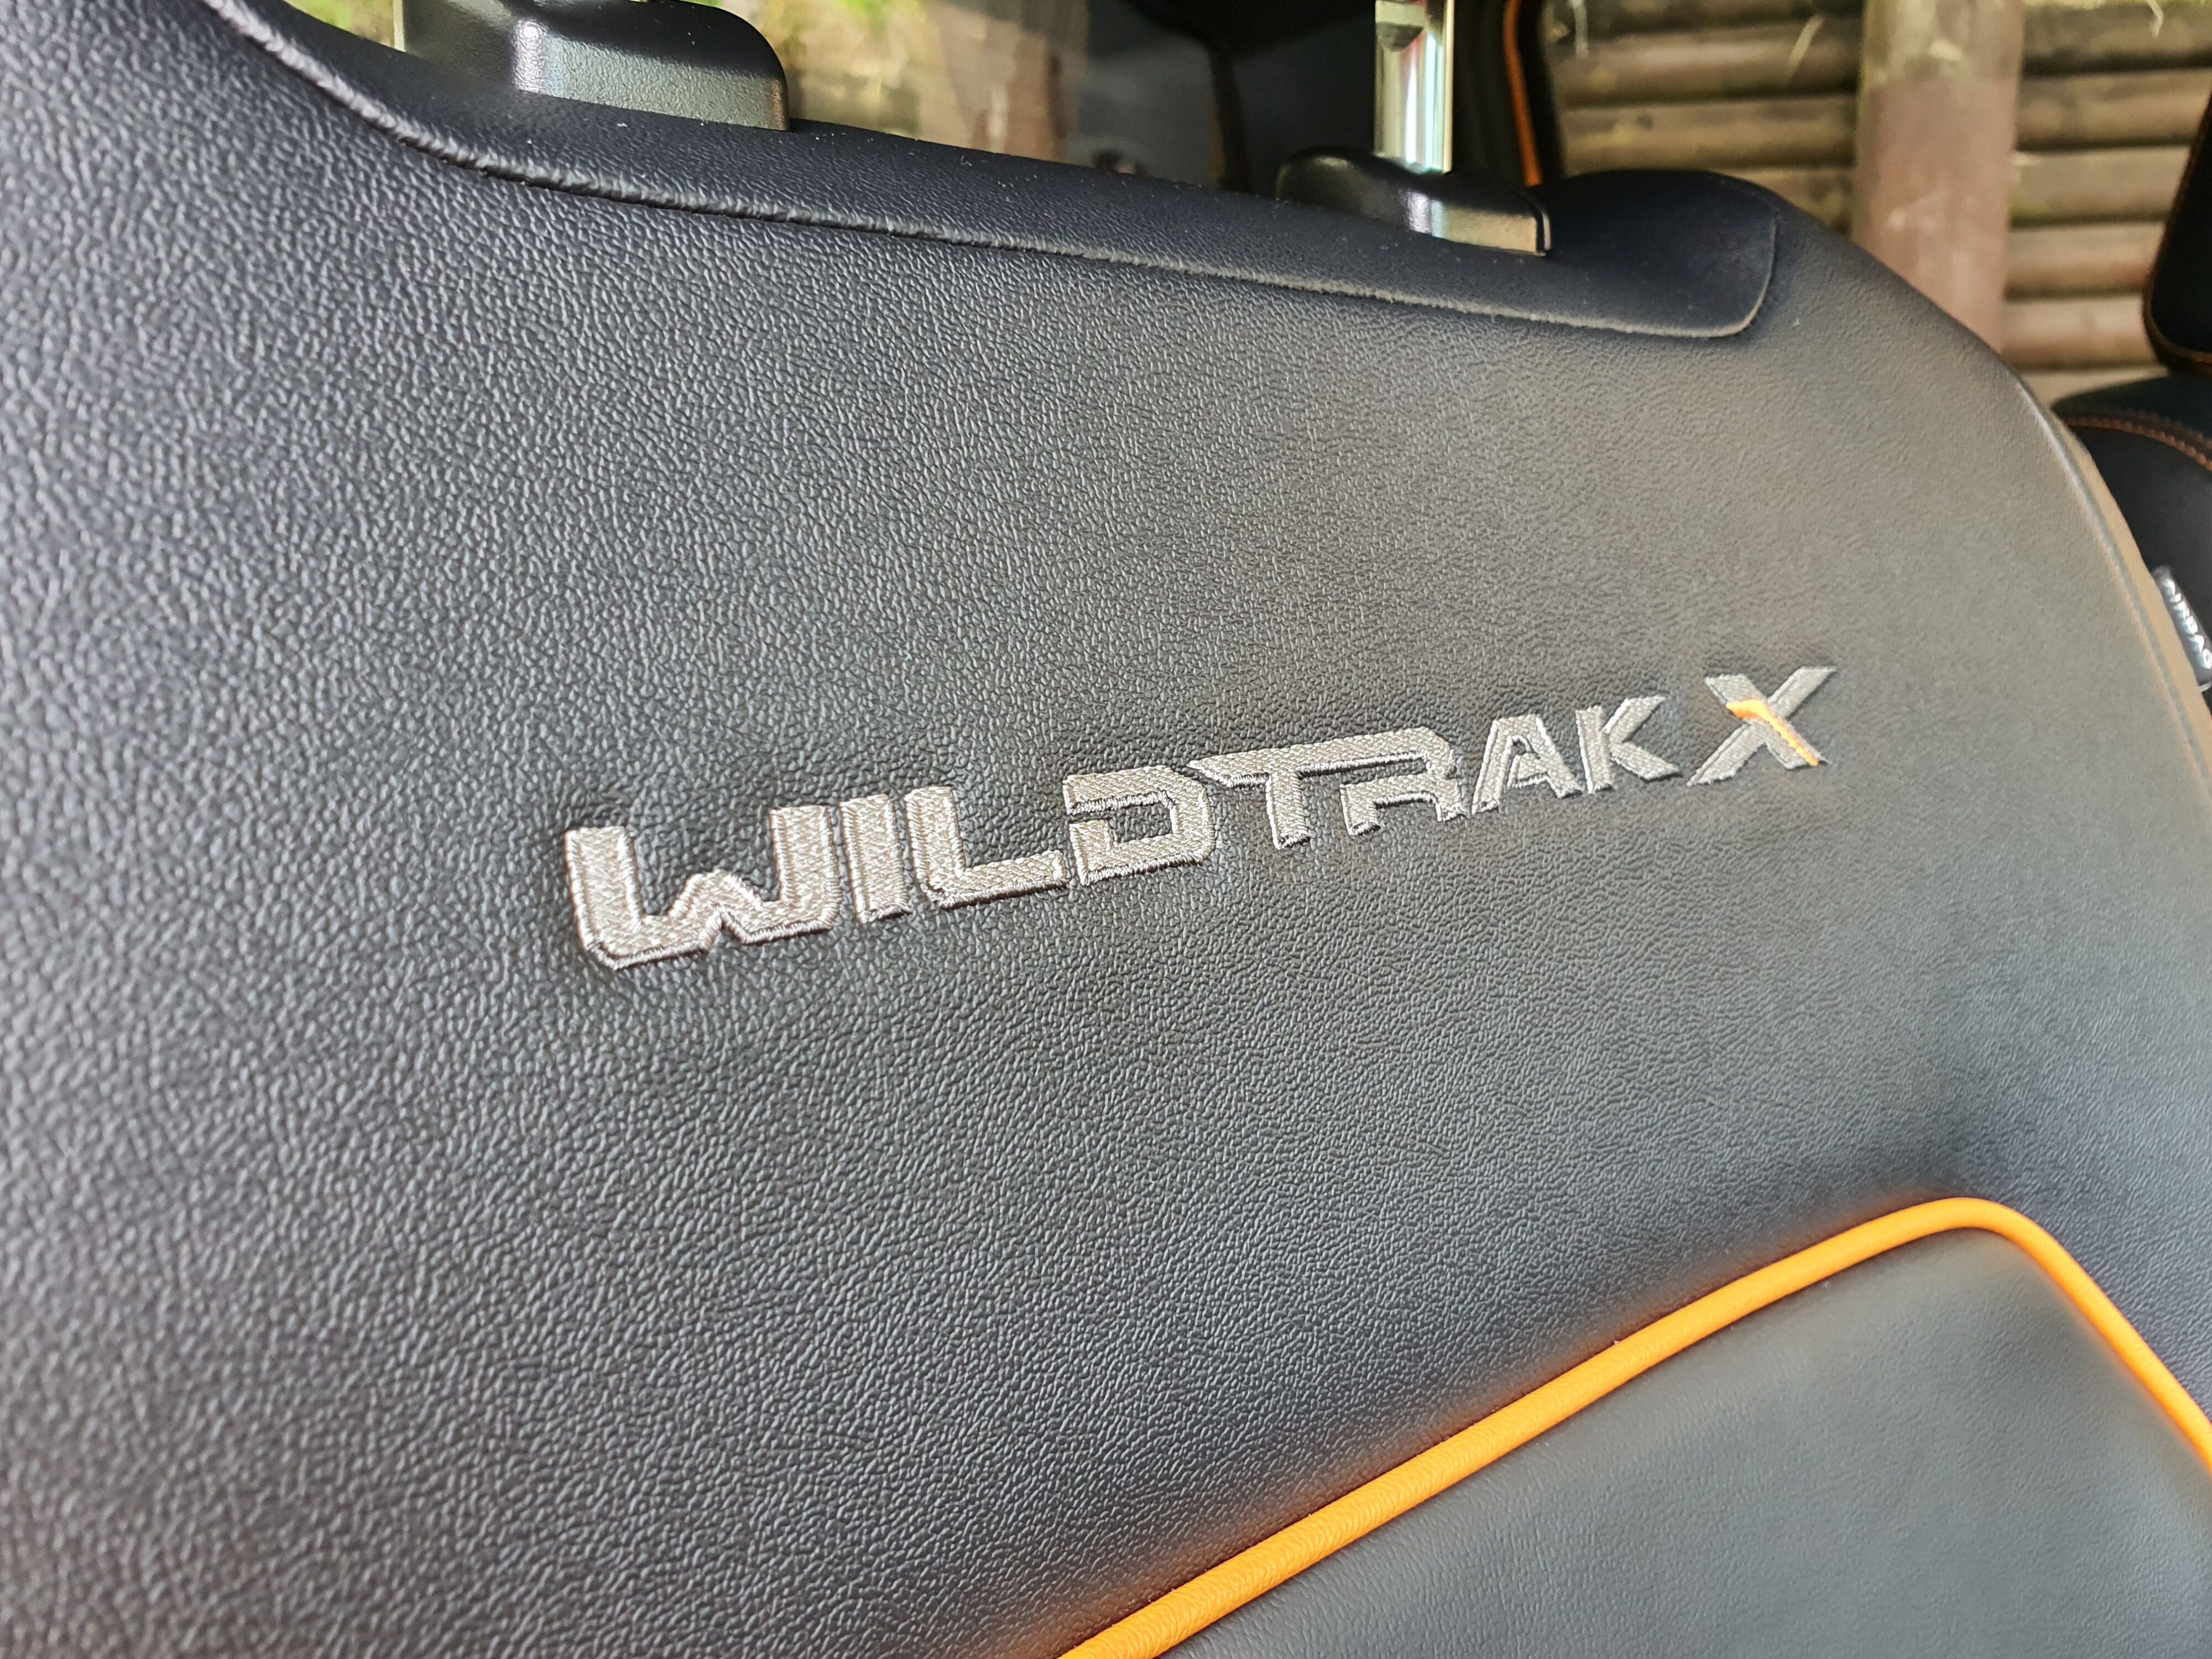 Wildtrak X badging on the backrest of seats in the 2023 Ford Ranger Wildtrak X.